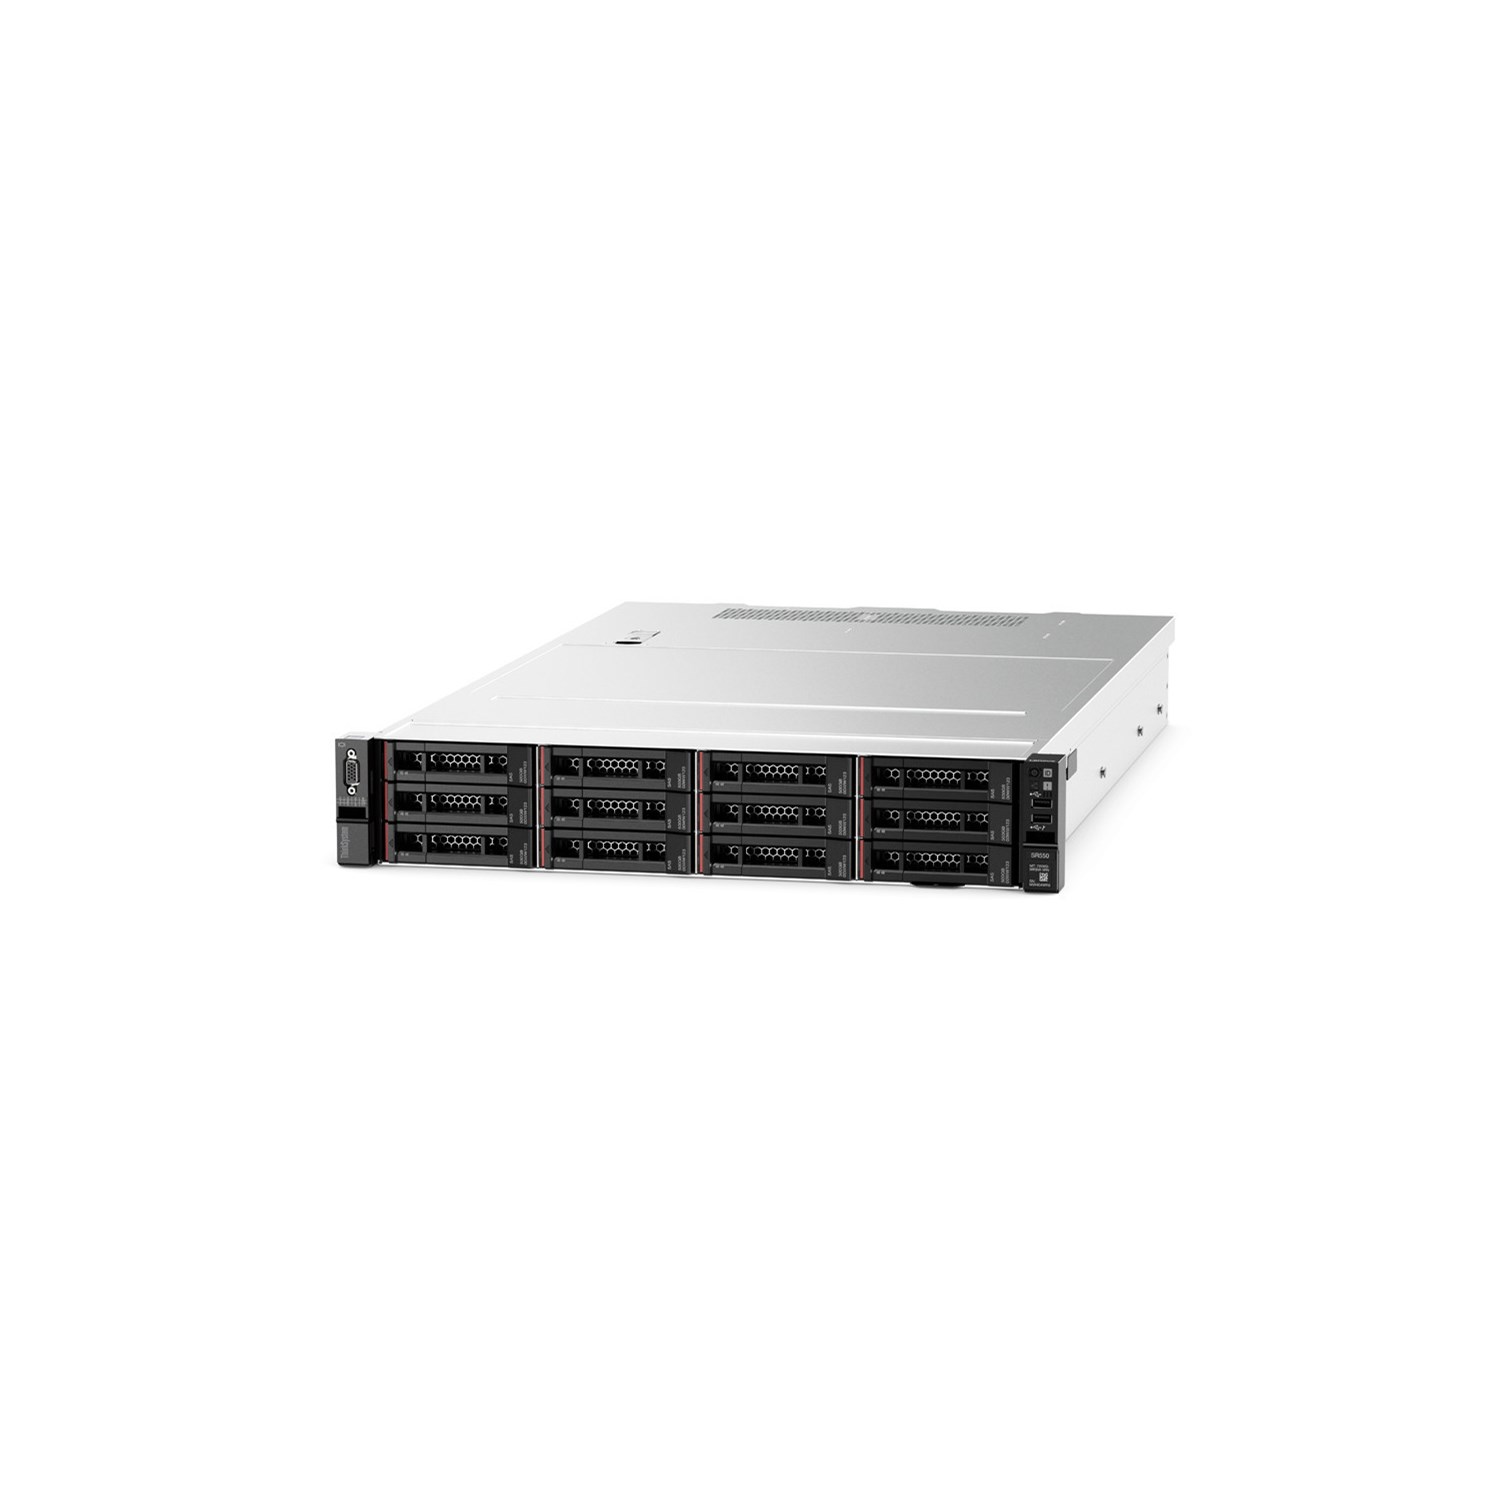 Rack Mounted/Lenovo: SR550, SILVER, 4208, 8, Core, with, 16GB, RAM, 8SFF, drive, bays, and, 530-8i, array, 